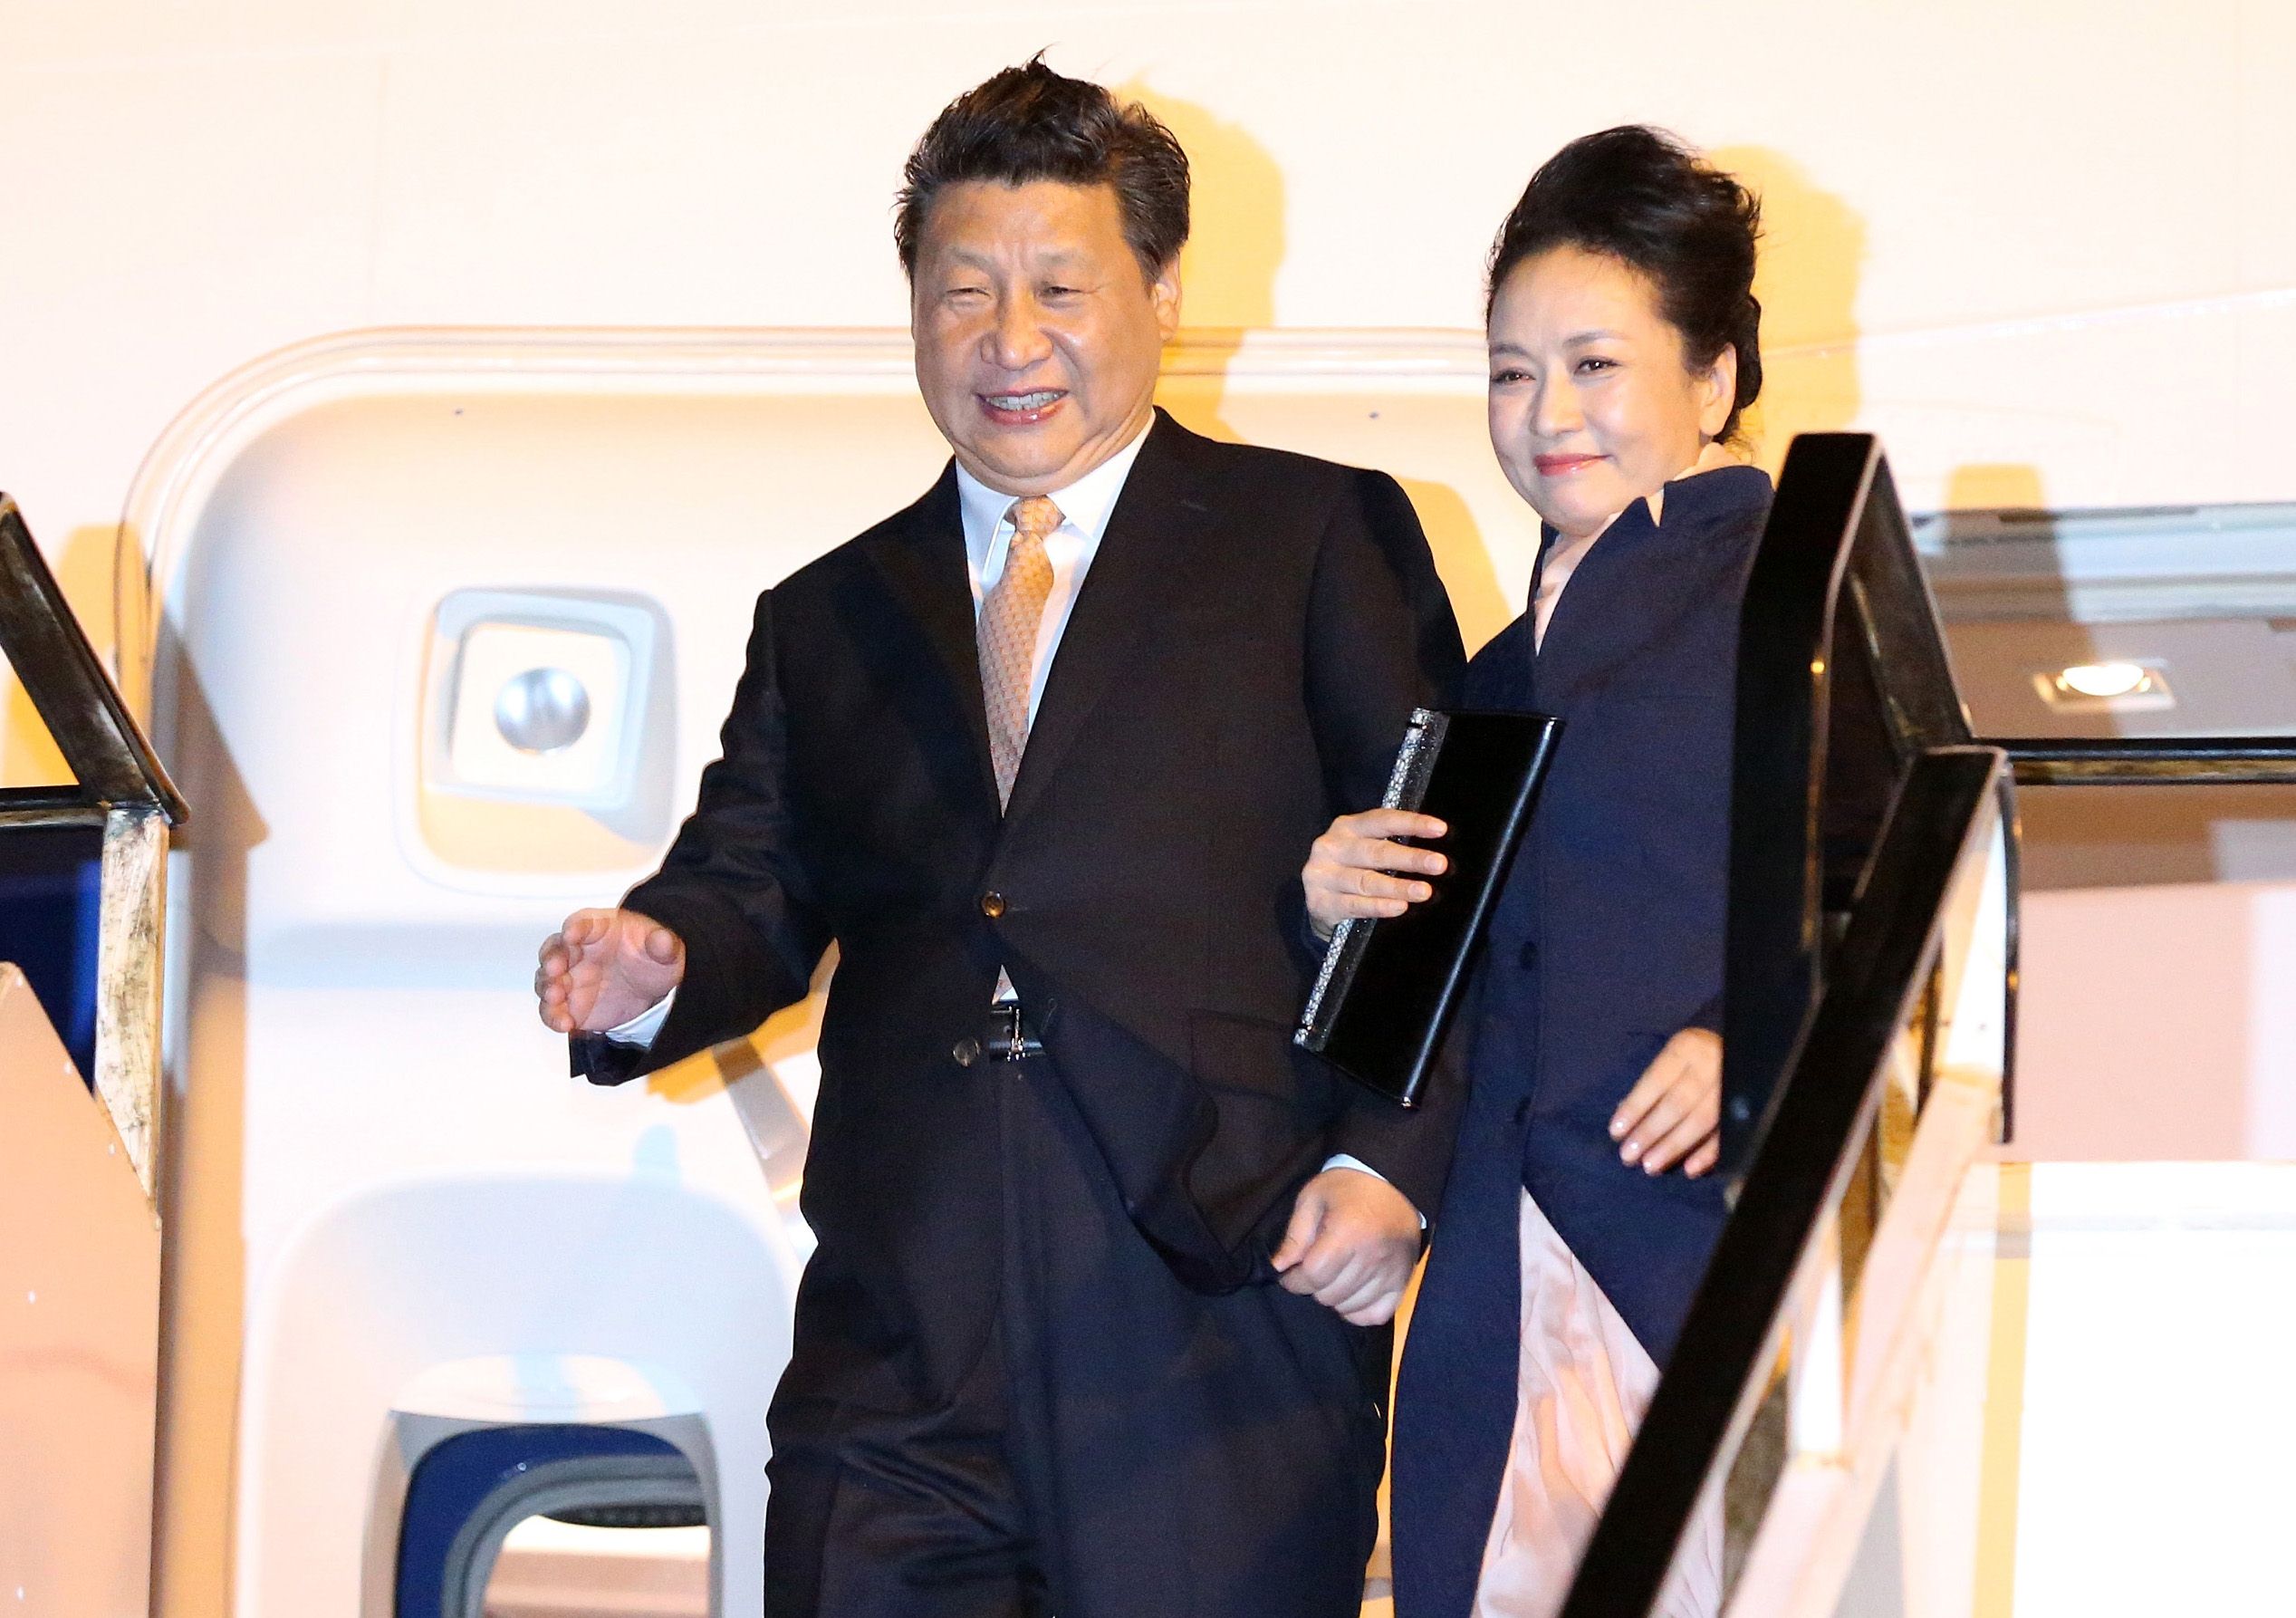 China's President Xi Jinping and his first lady Peng Liyuan are the picture of bliss as they arrive in Auckland on a trip to New Zealand last year. Photo: AFP